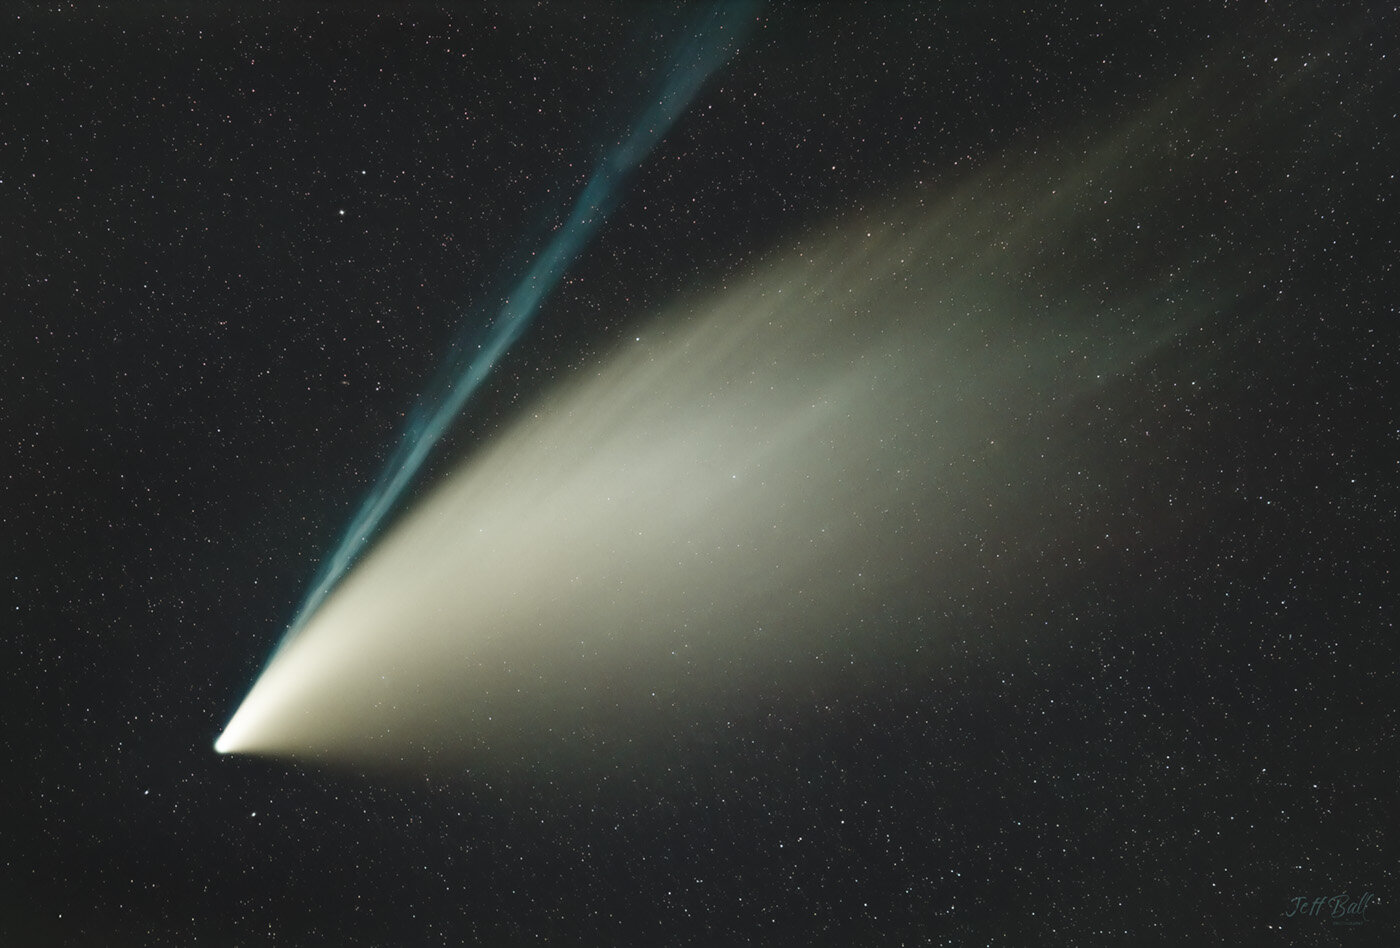 Comet Neowise 2020